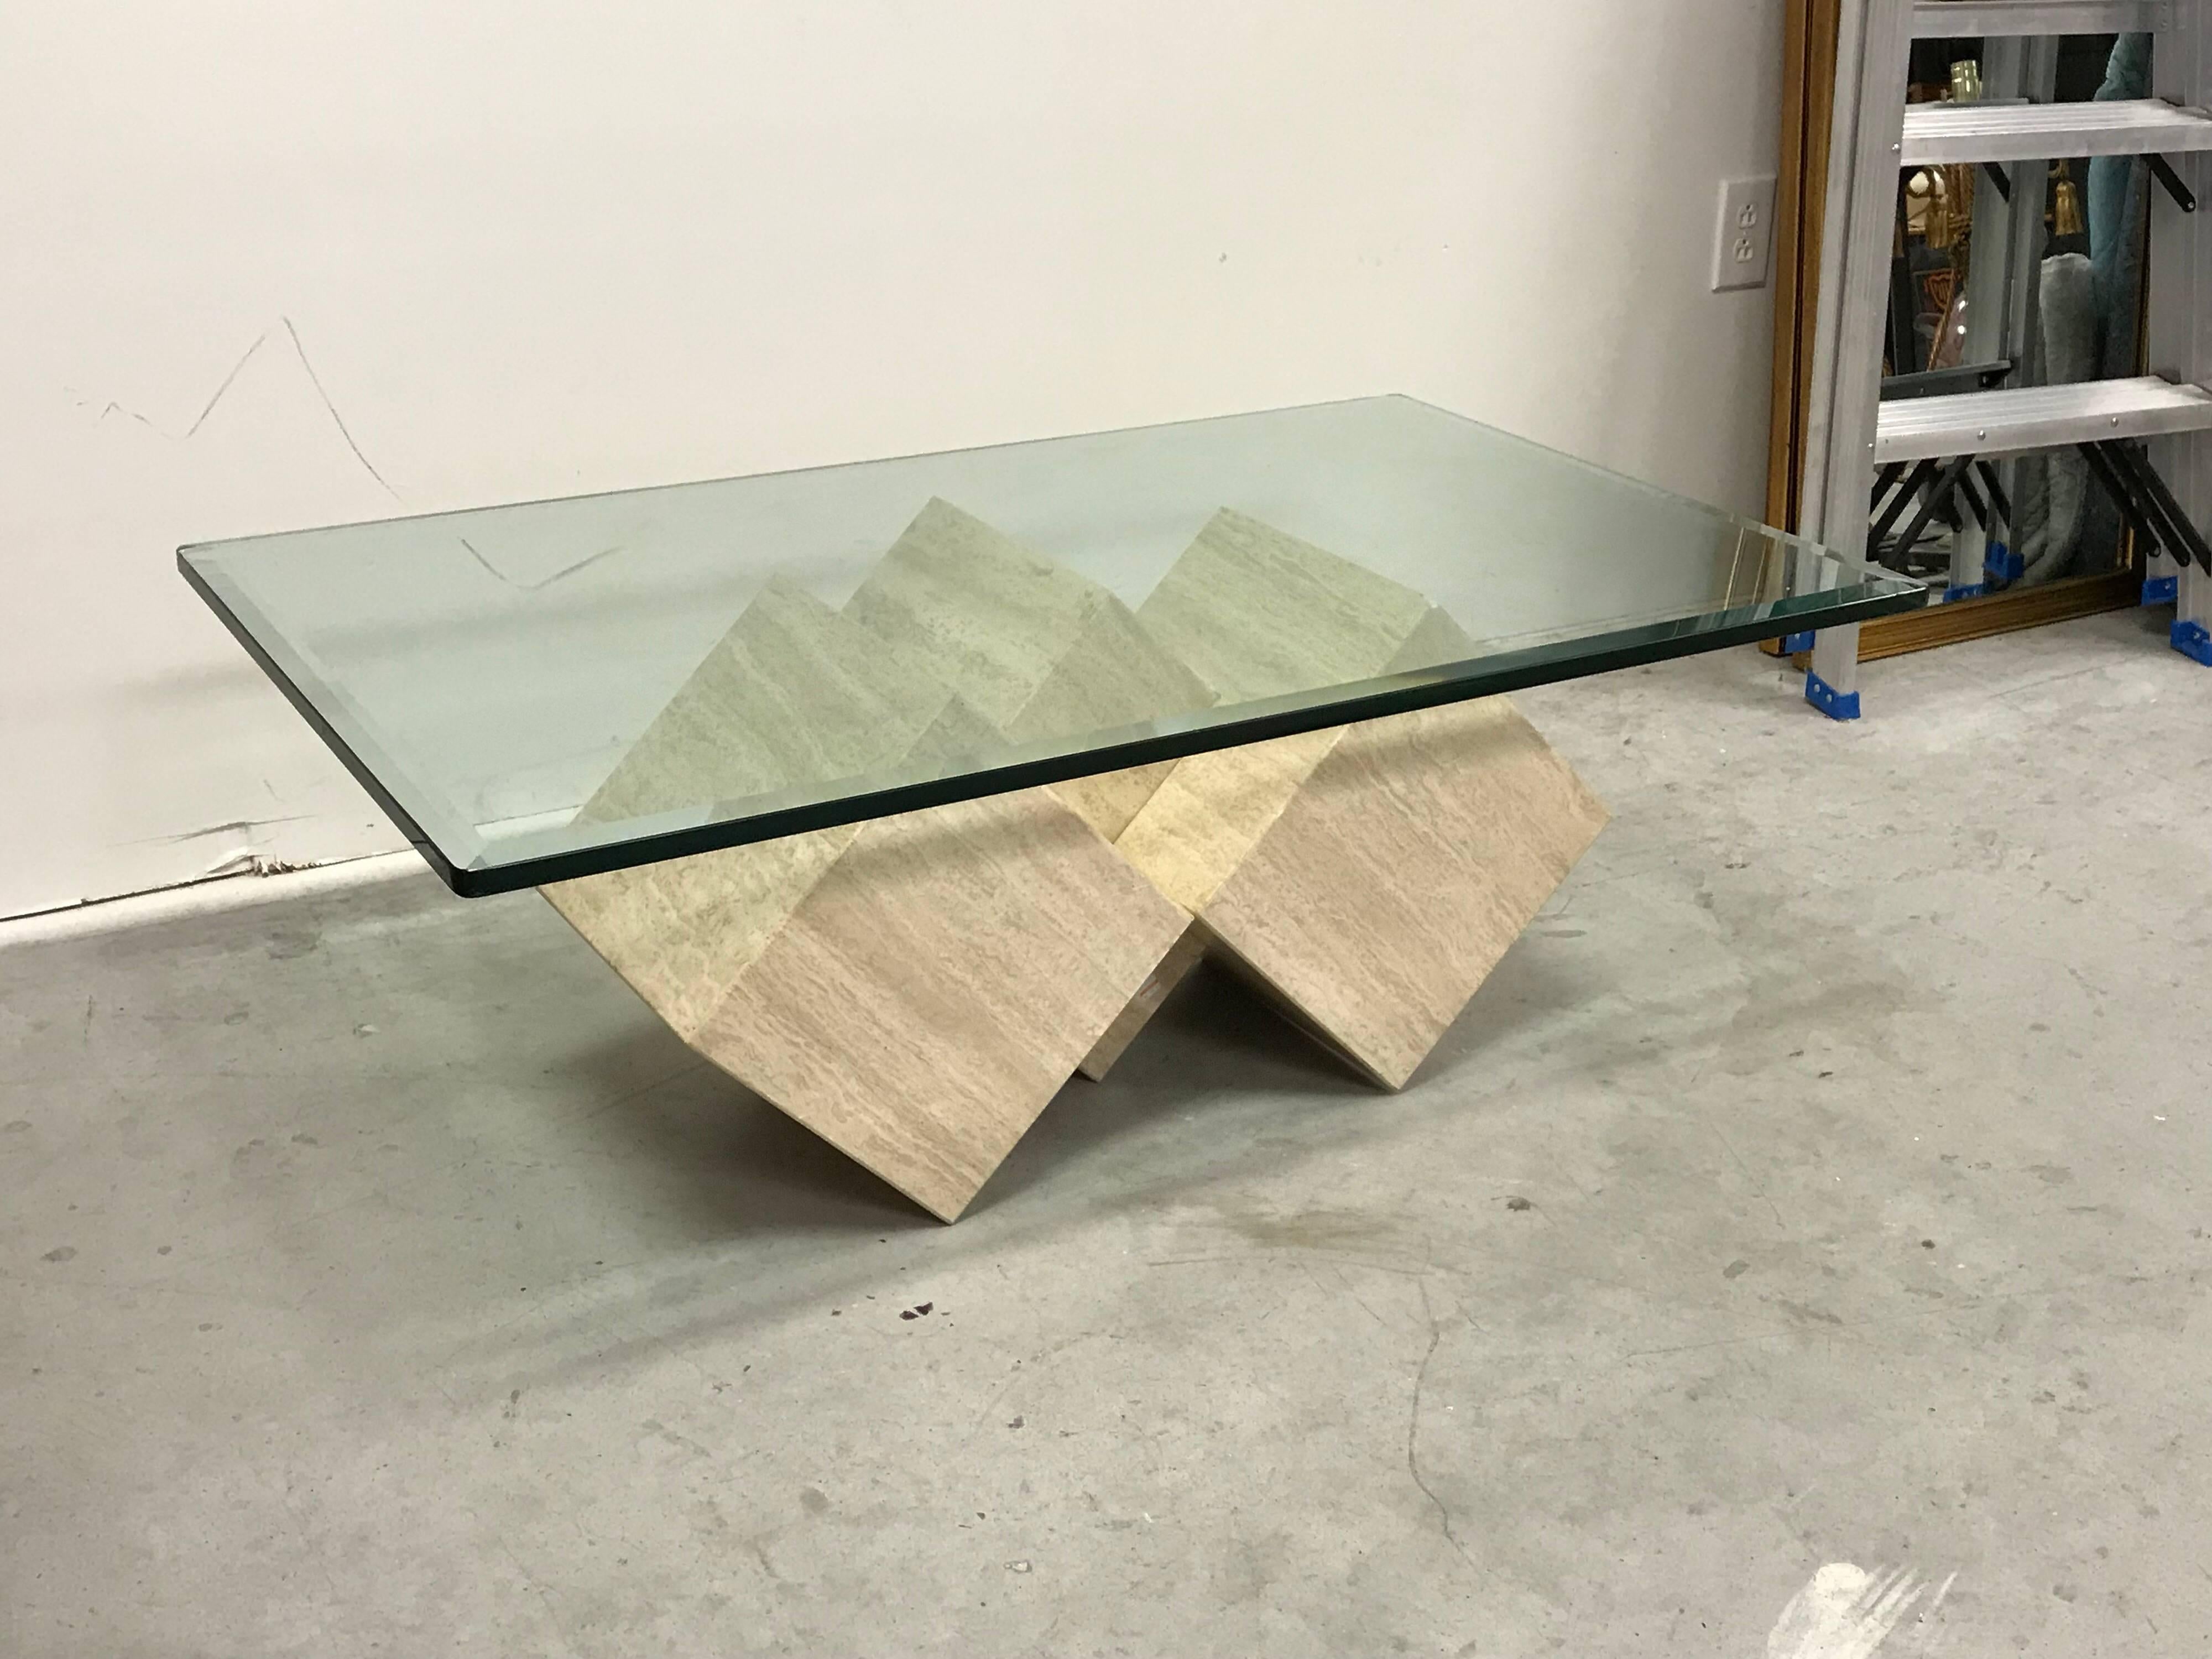 Offered is a stunning, 1970s Italian travertine cube coffee table by Guy Barker for Ello Furniture Company. The piece has a thick, weighted glass top rested upon three interlocked travertine cubes. The base can be repositioned in several ways, see